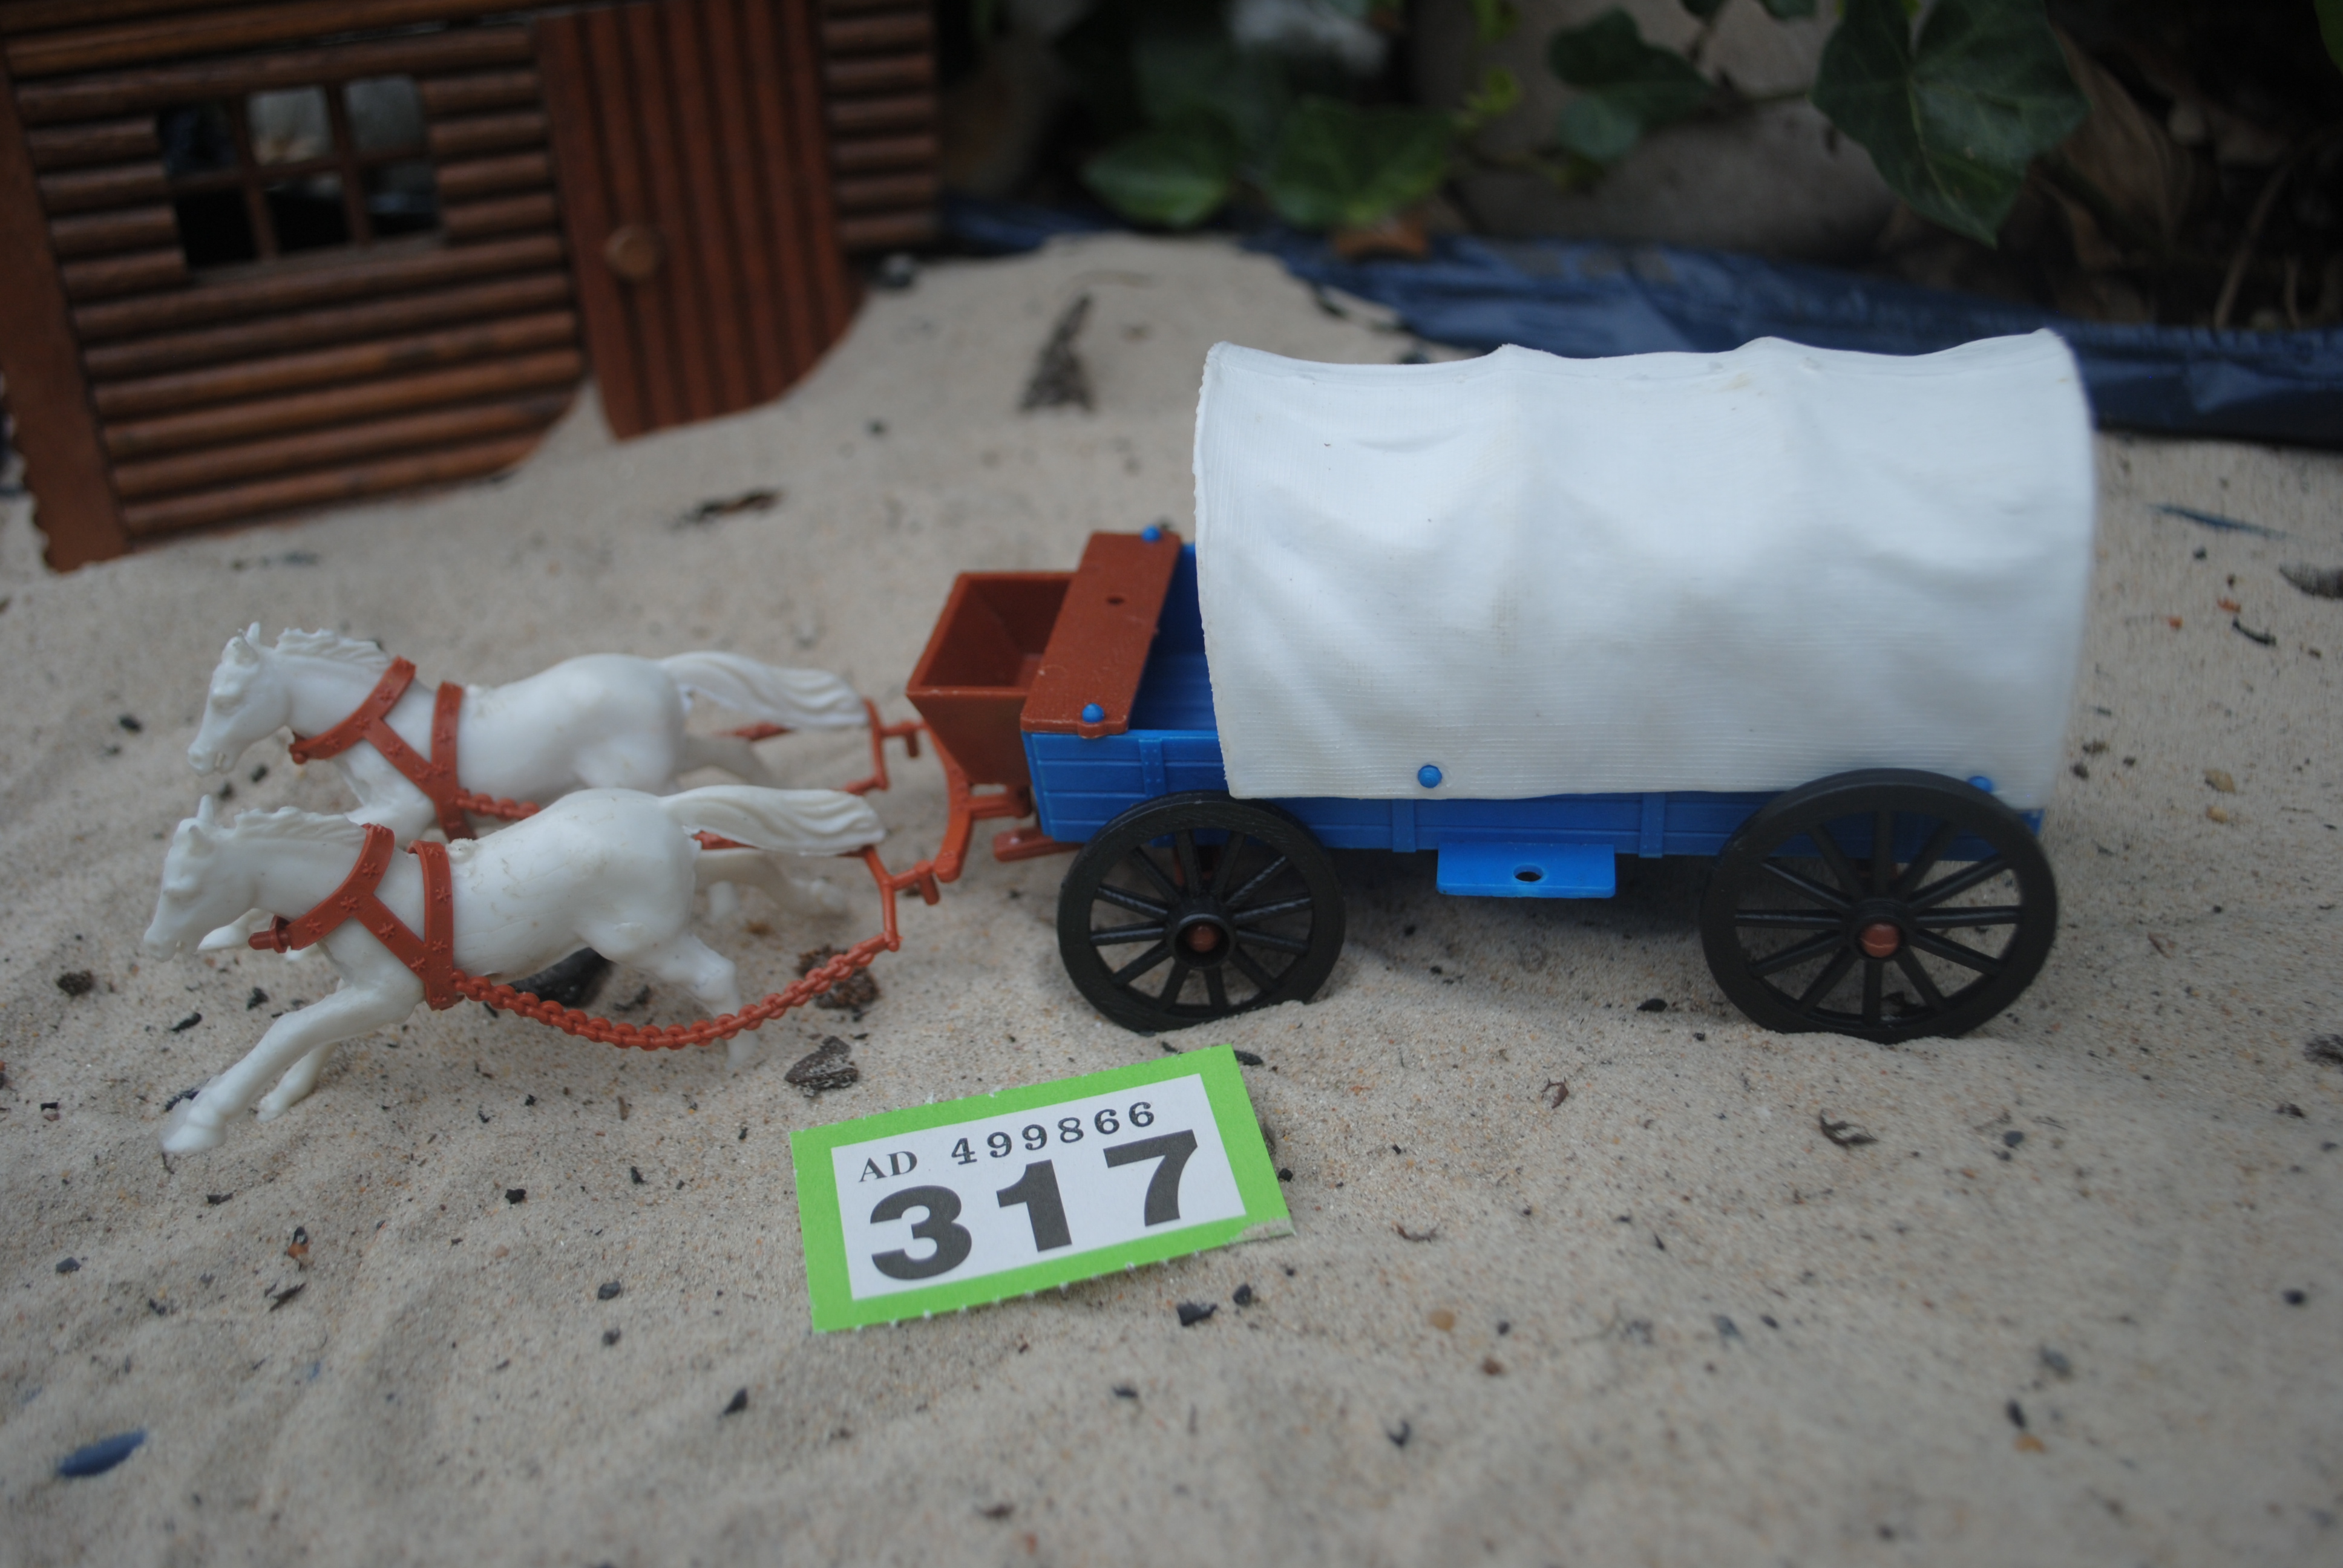 Timpo Toys G.317 Covered wagon